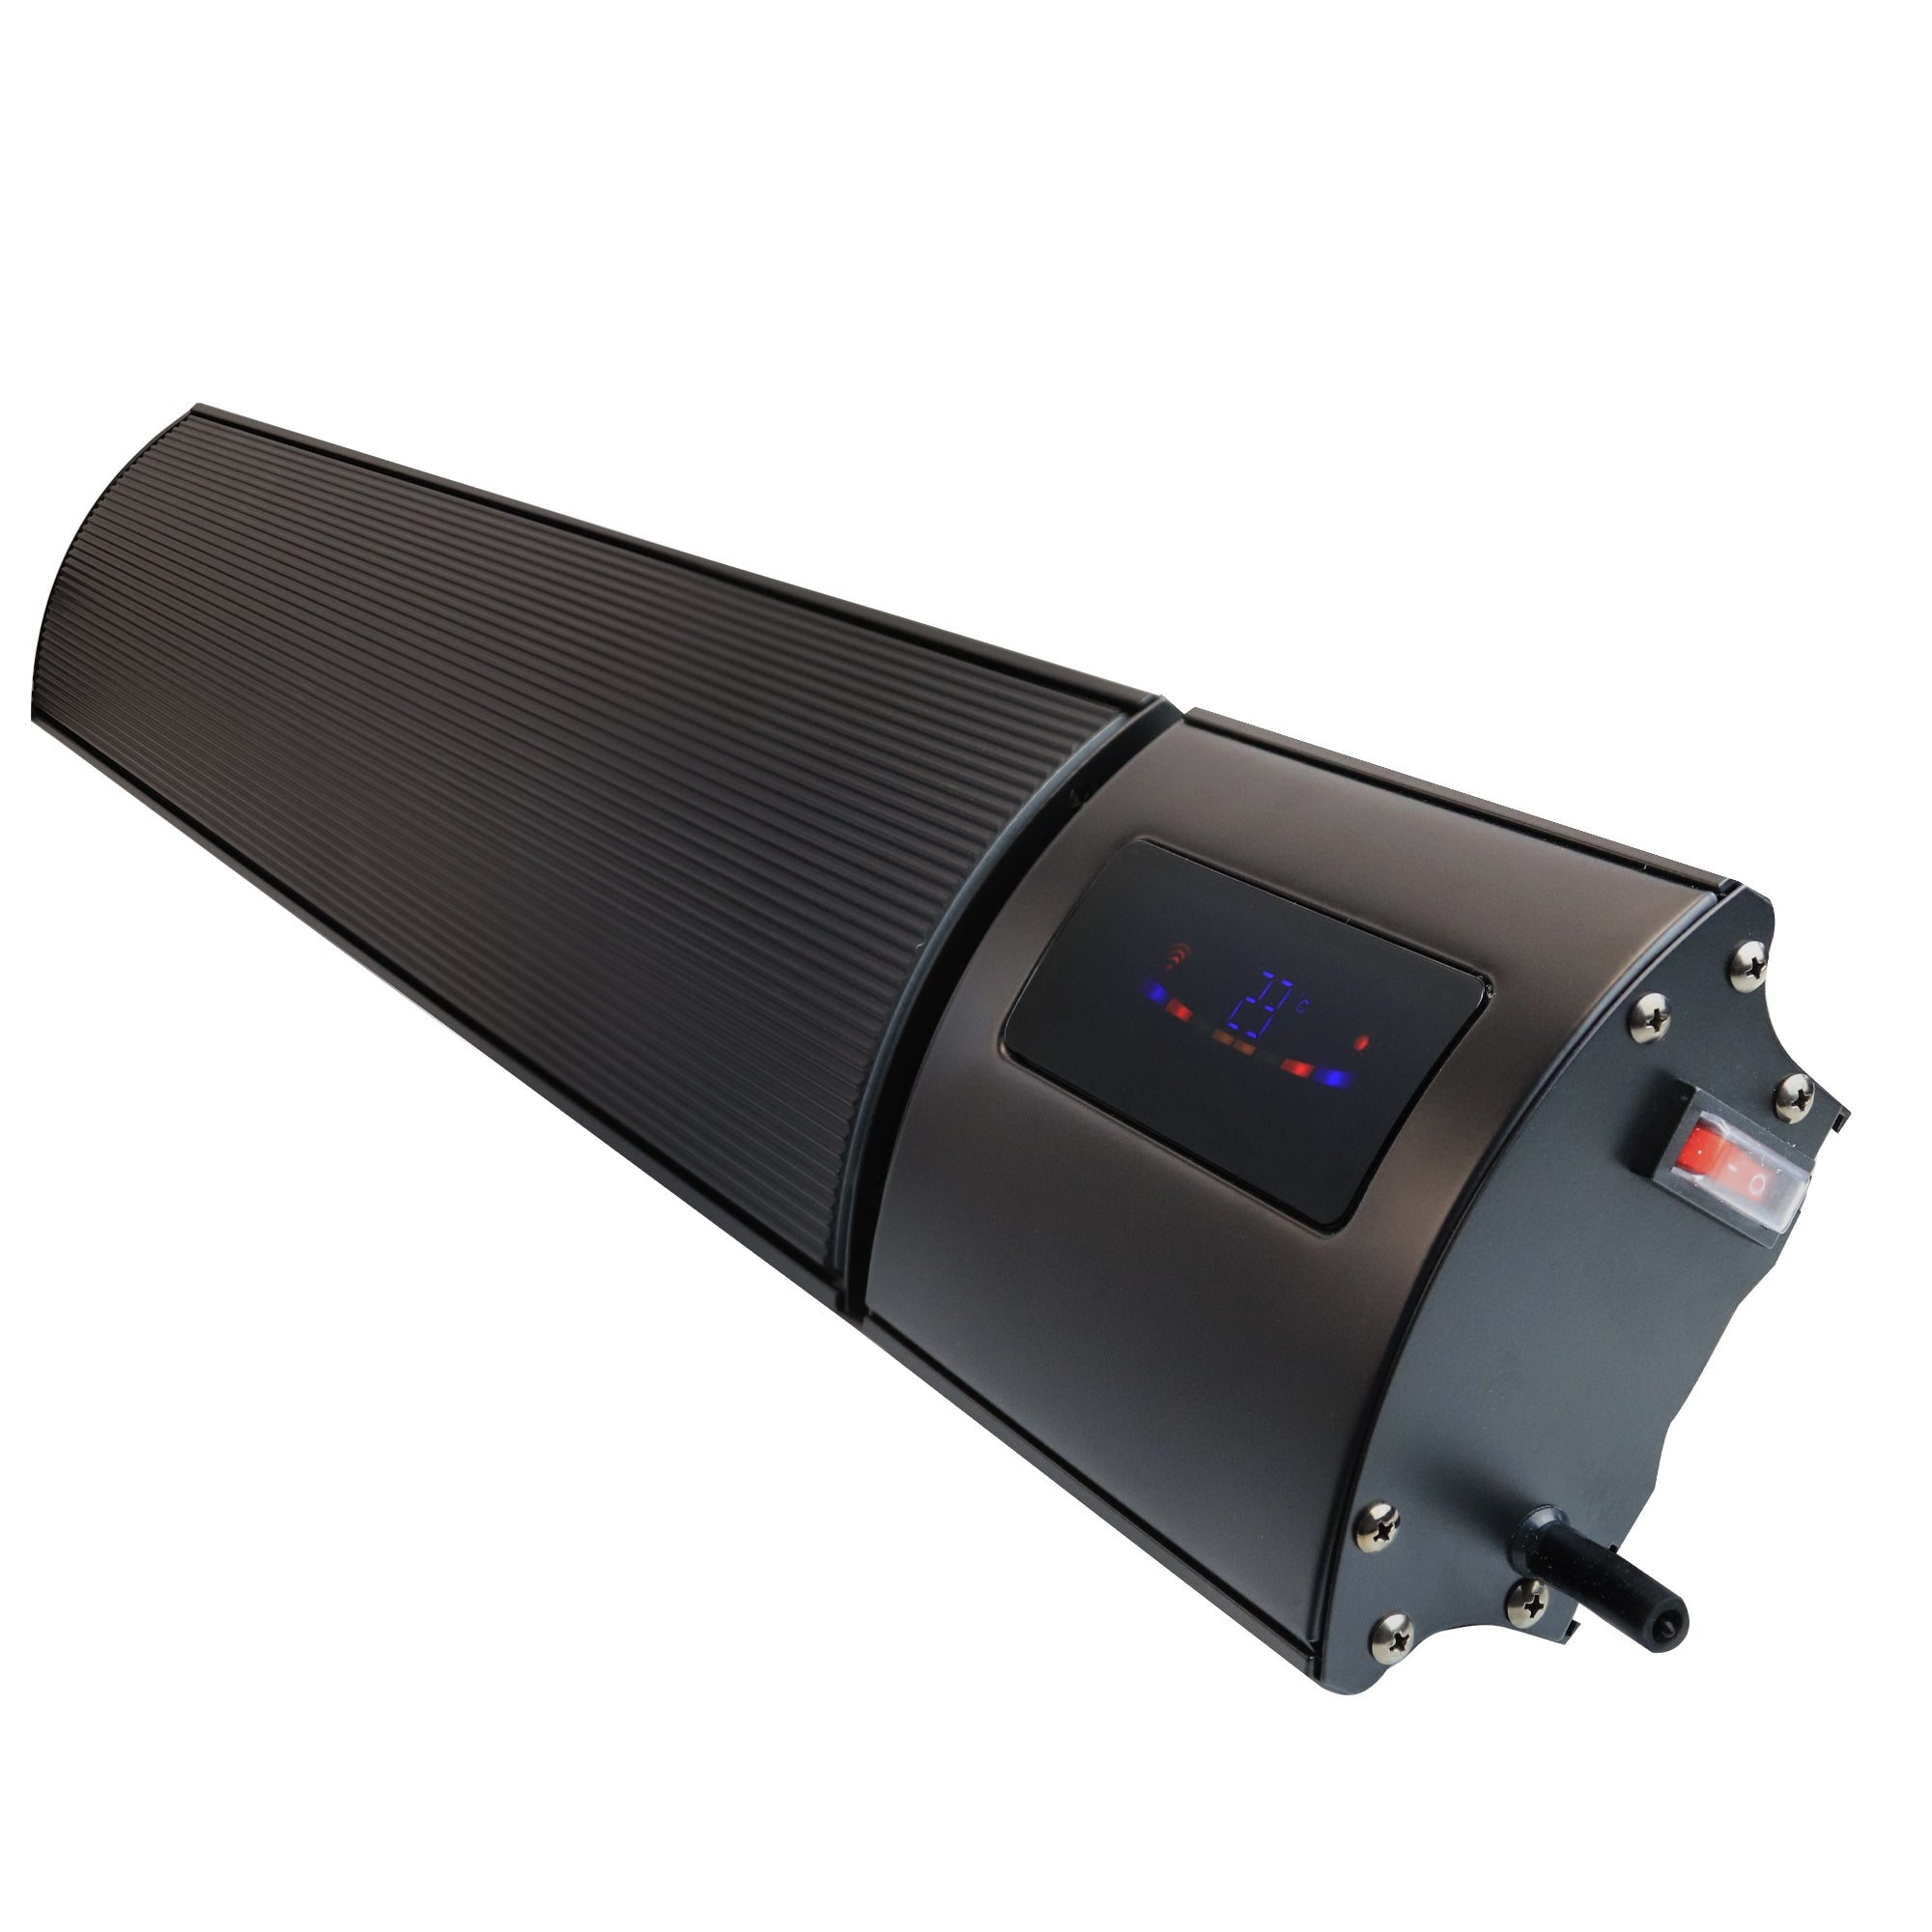 1.2kW Helios Wi-Fi Remote Controllable Infrared Bar Heater